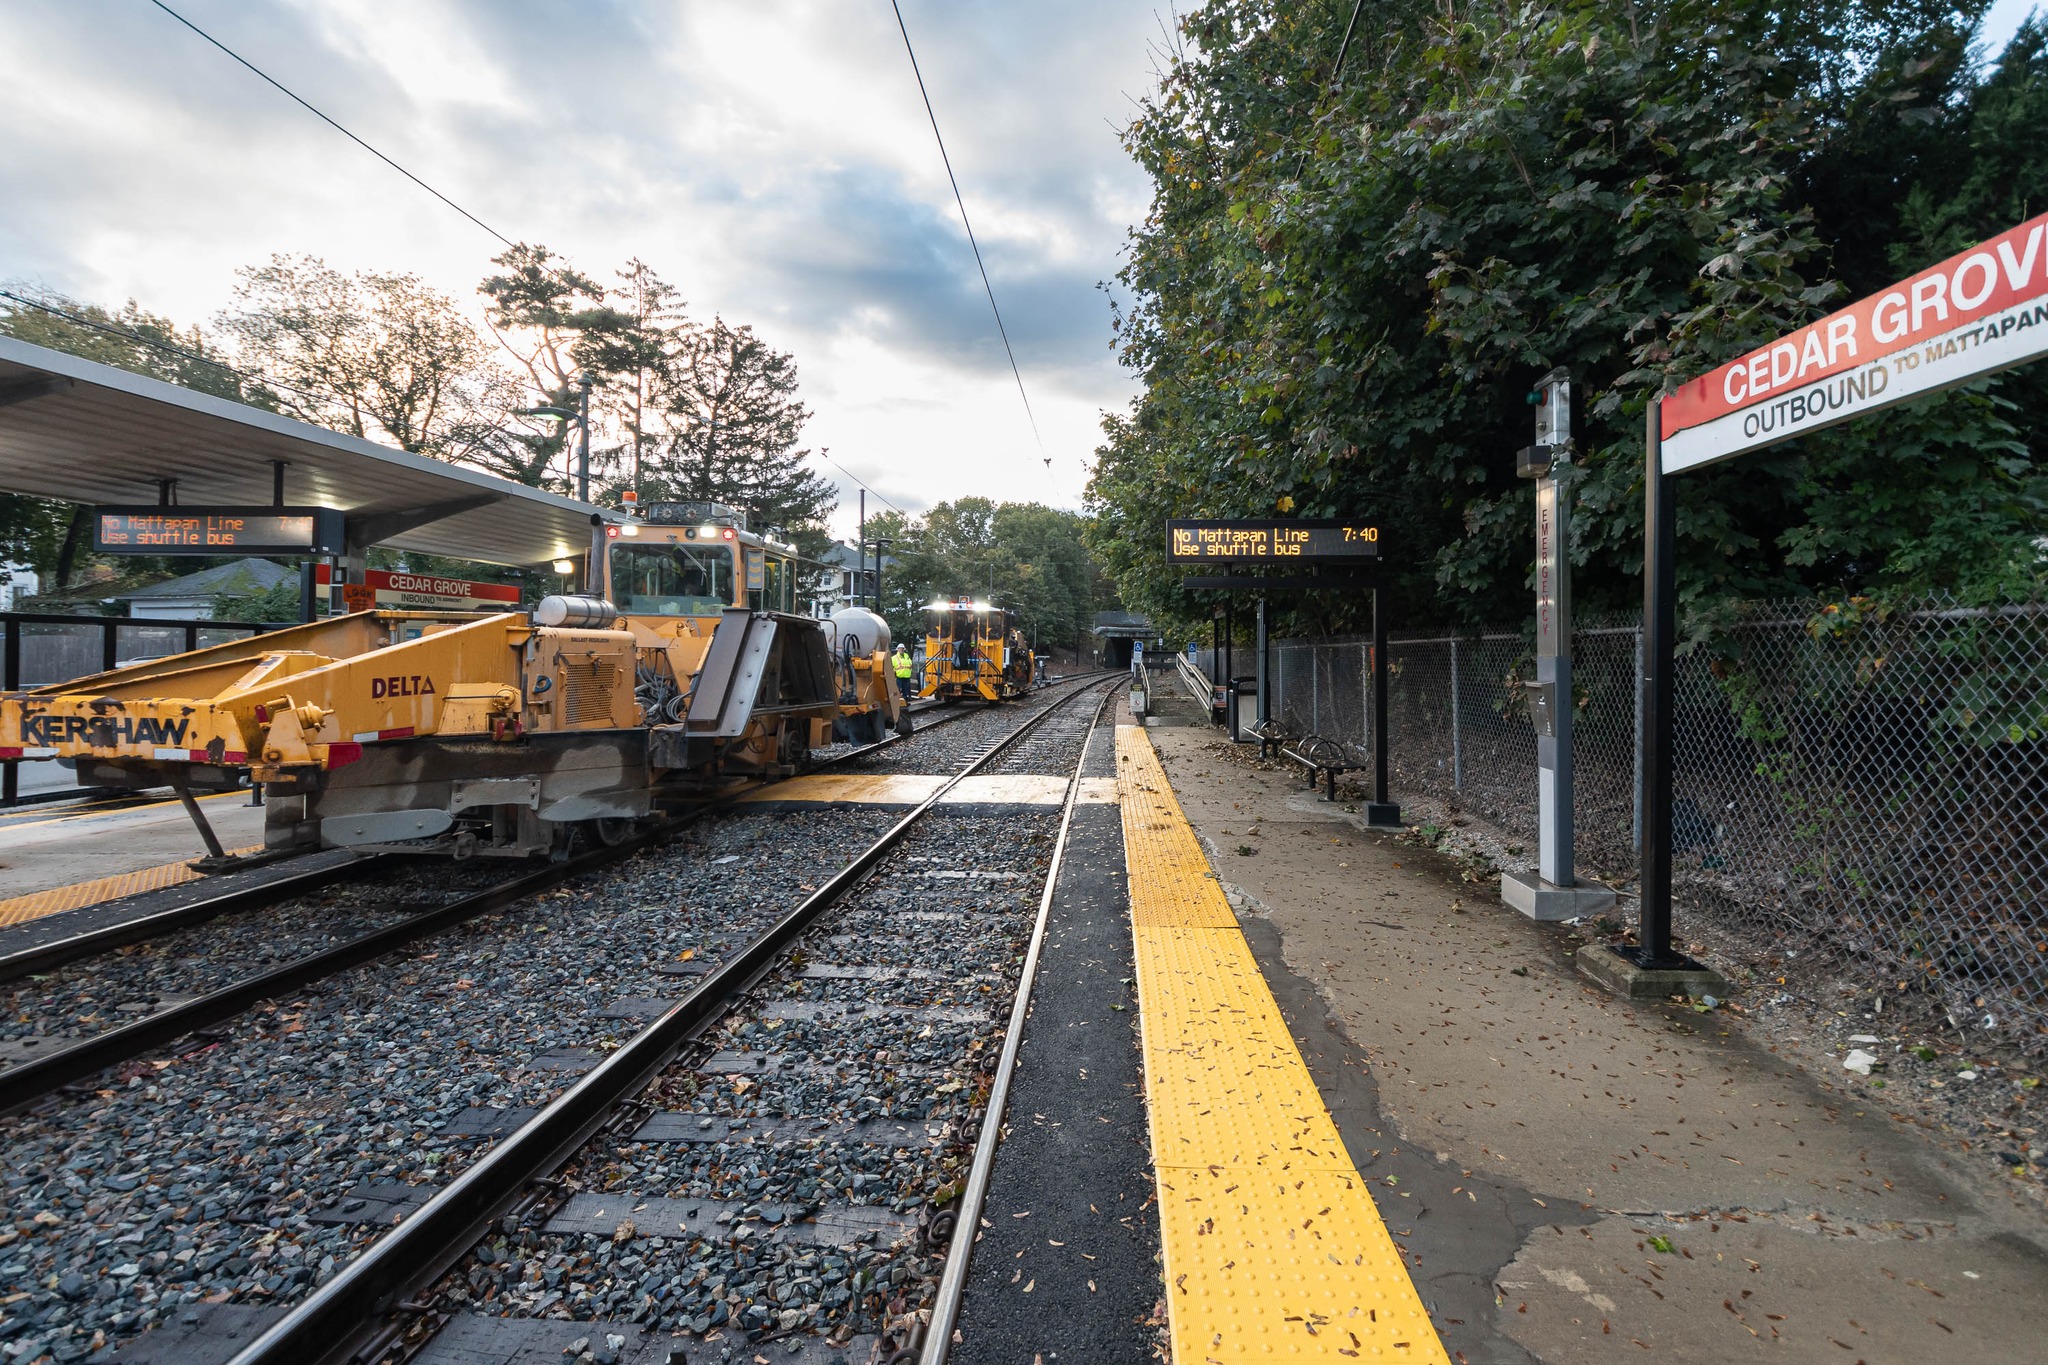 A yellow maintenance train sits on the tracks next to a platform of a train station. A red-and-white sign on the right platform, which is adjacent to a second empty track, shows that this station is Cedar Grove on the MBTA red line.